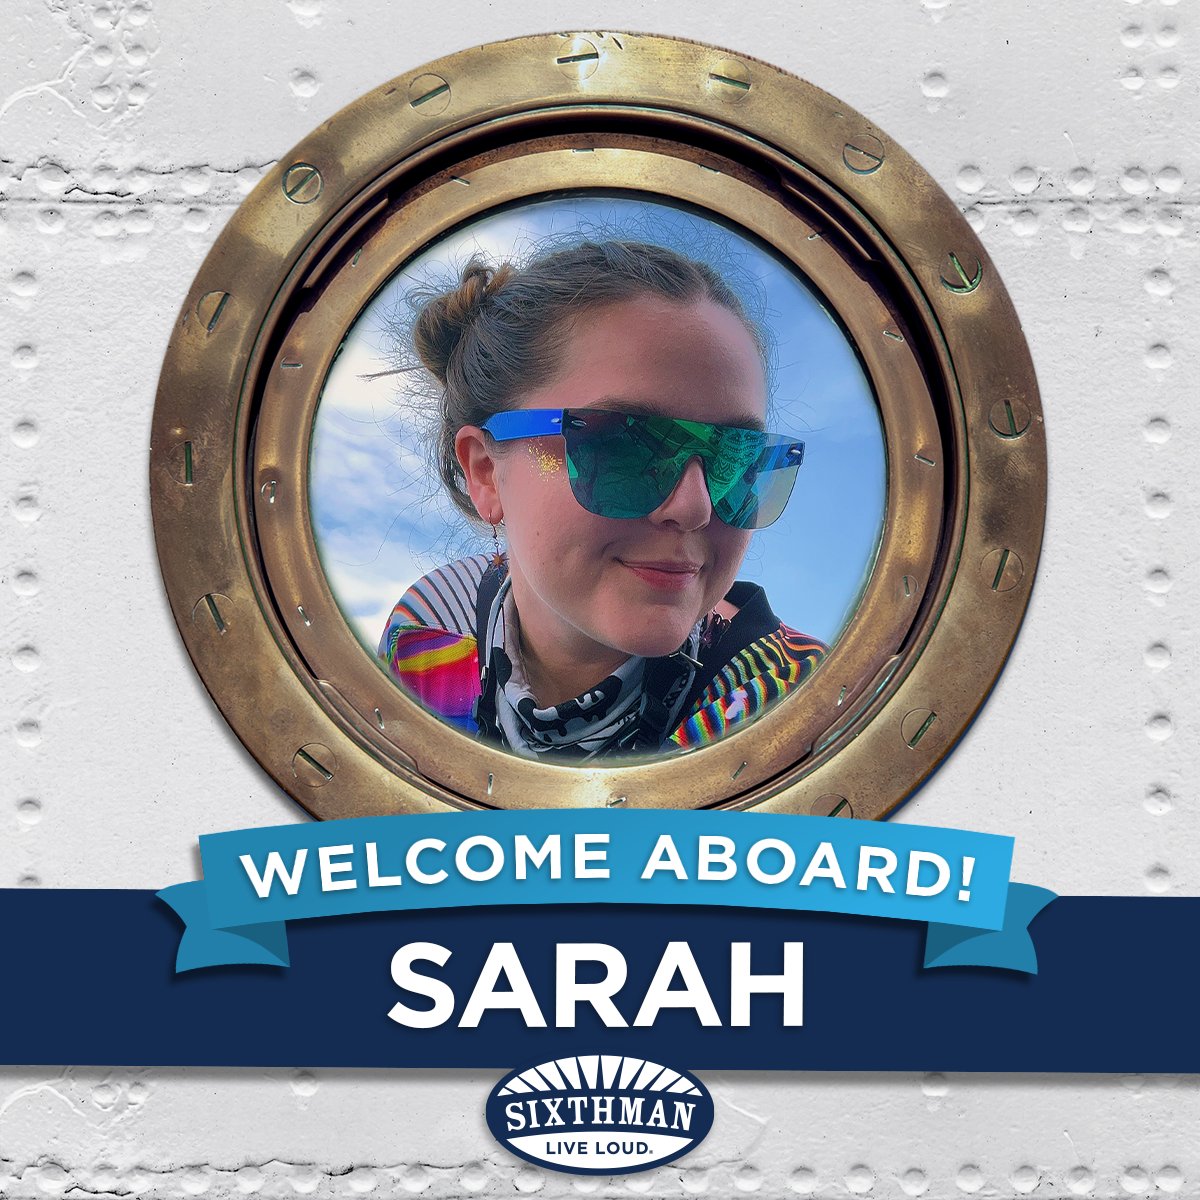 We are very excited to welcome two new Community Experience Specialists, Sarah and Belle, to our team! We cannot wait to watch you care and look after our incredible communities. Welcome aboard! ⚓️